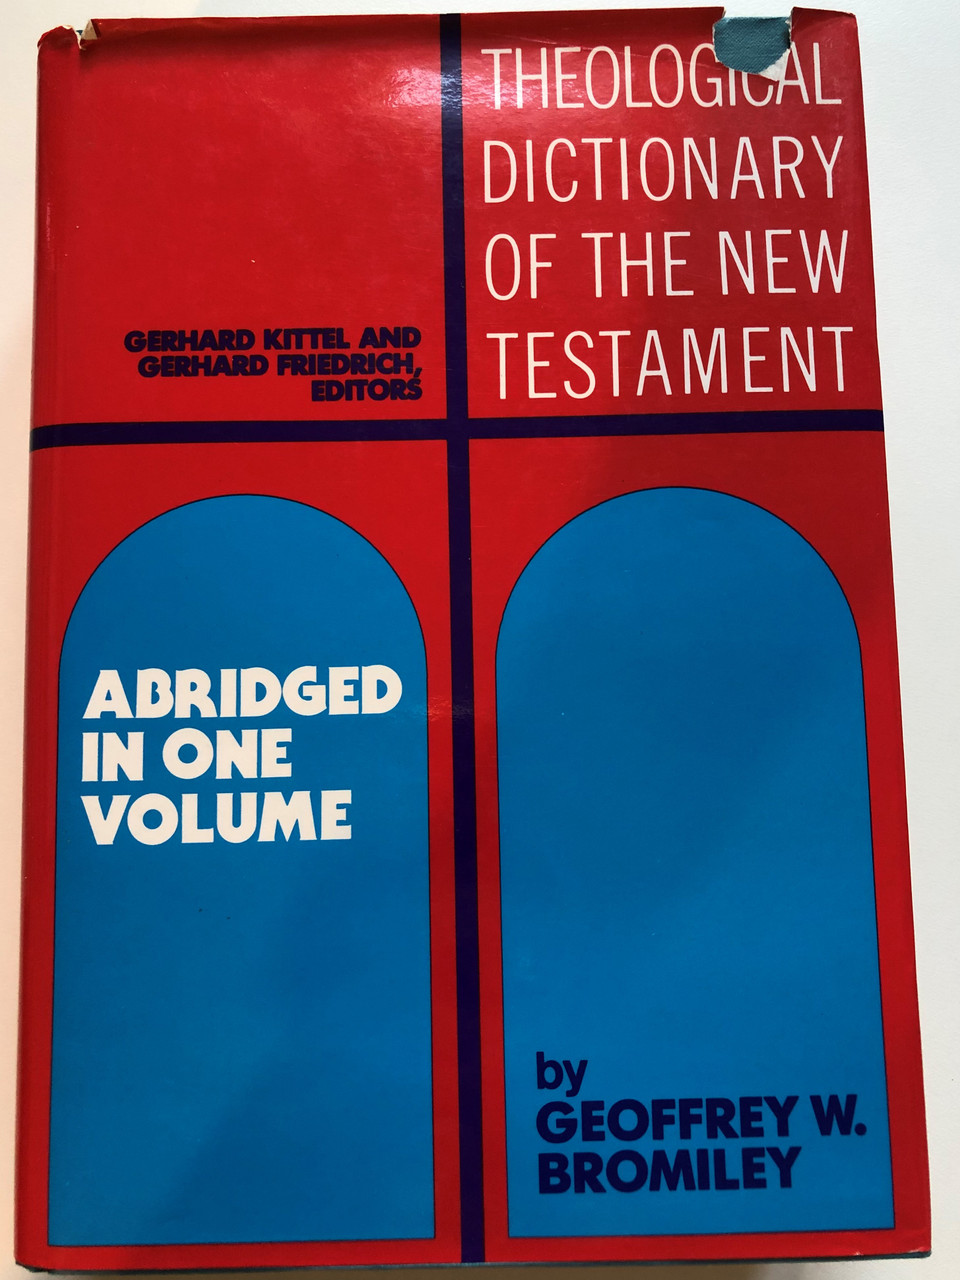 https://cdn10.bigcommerce.com/s-62bdpkt7pb/products/0/images/257308/Theological_dictionary_of_the_New_Testament_1__35507.1667225005.1280.1280.JPG?c=2